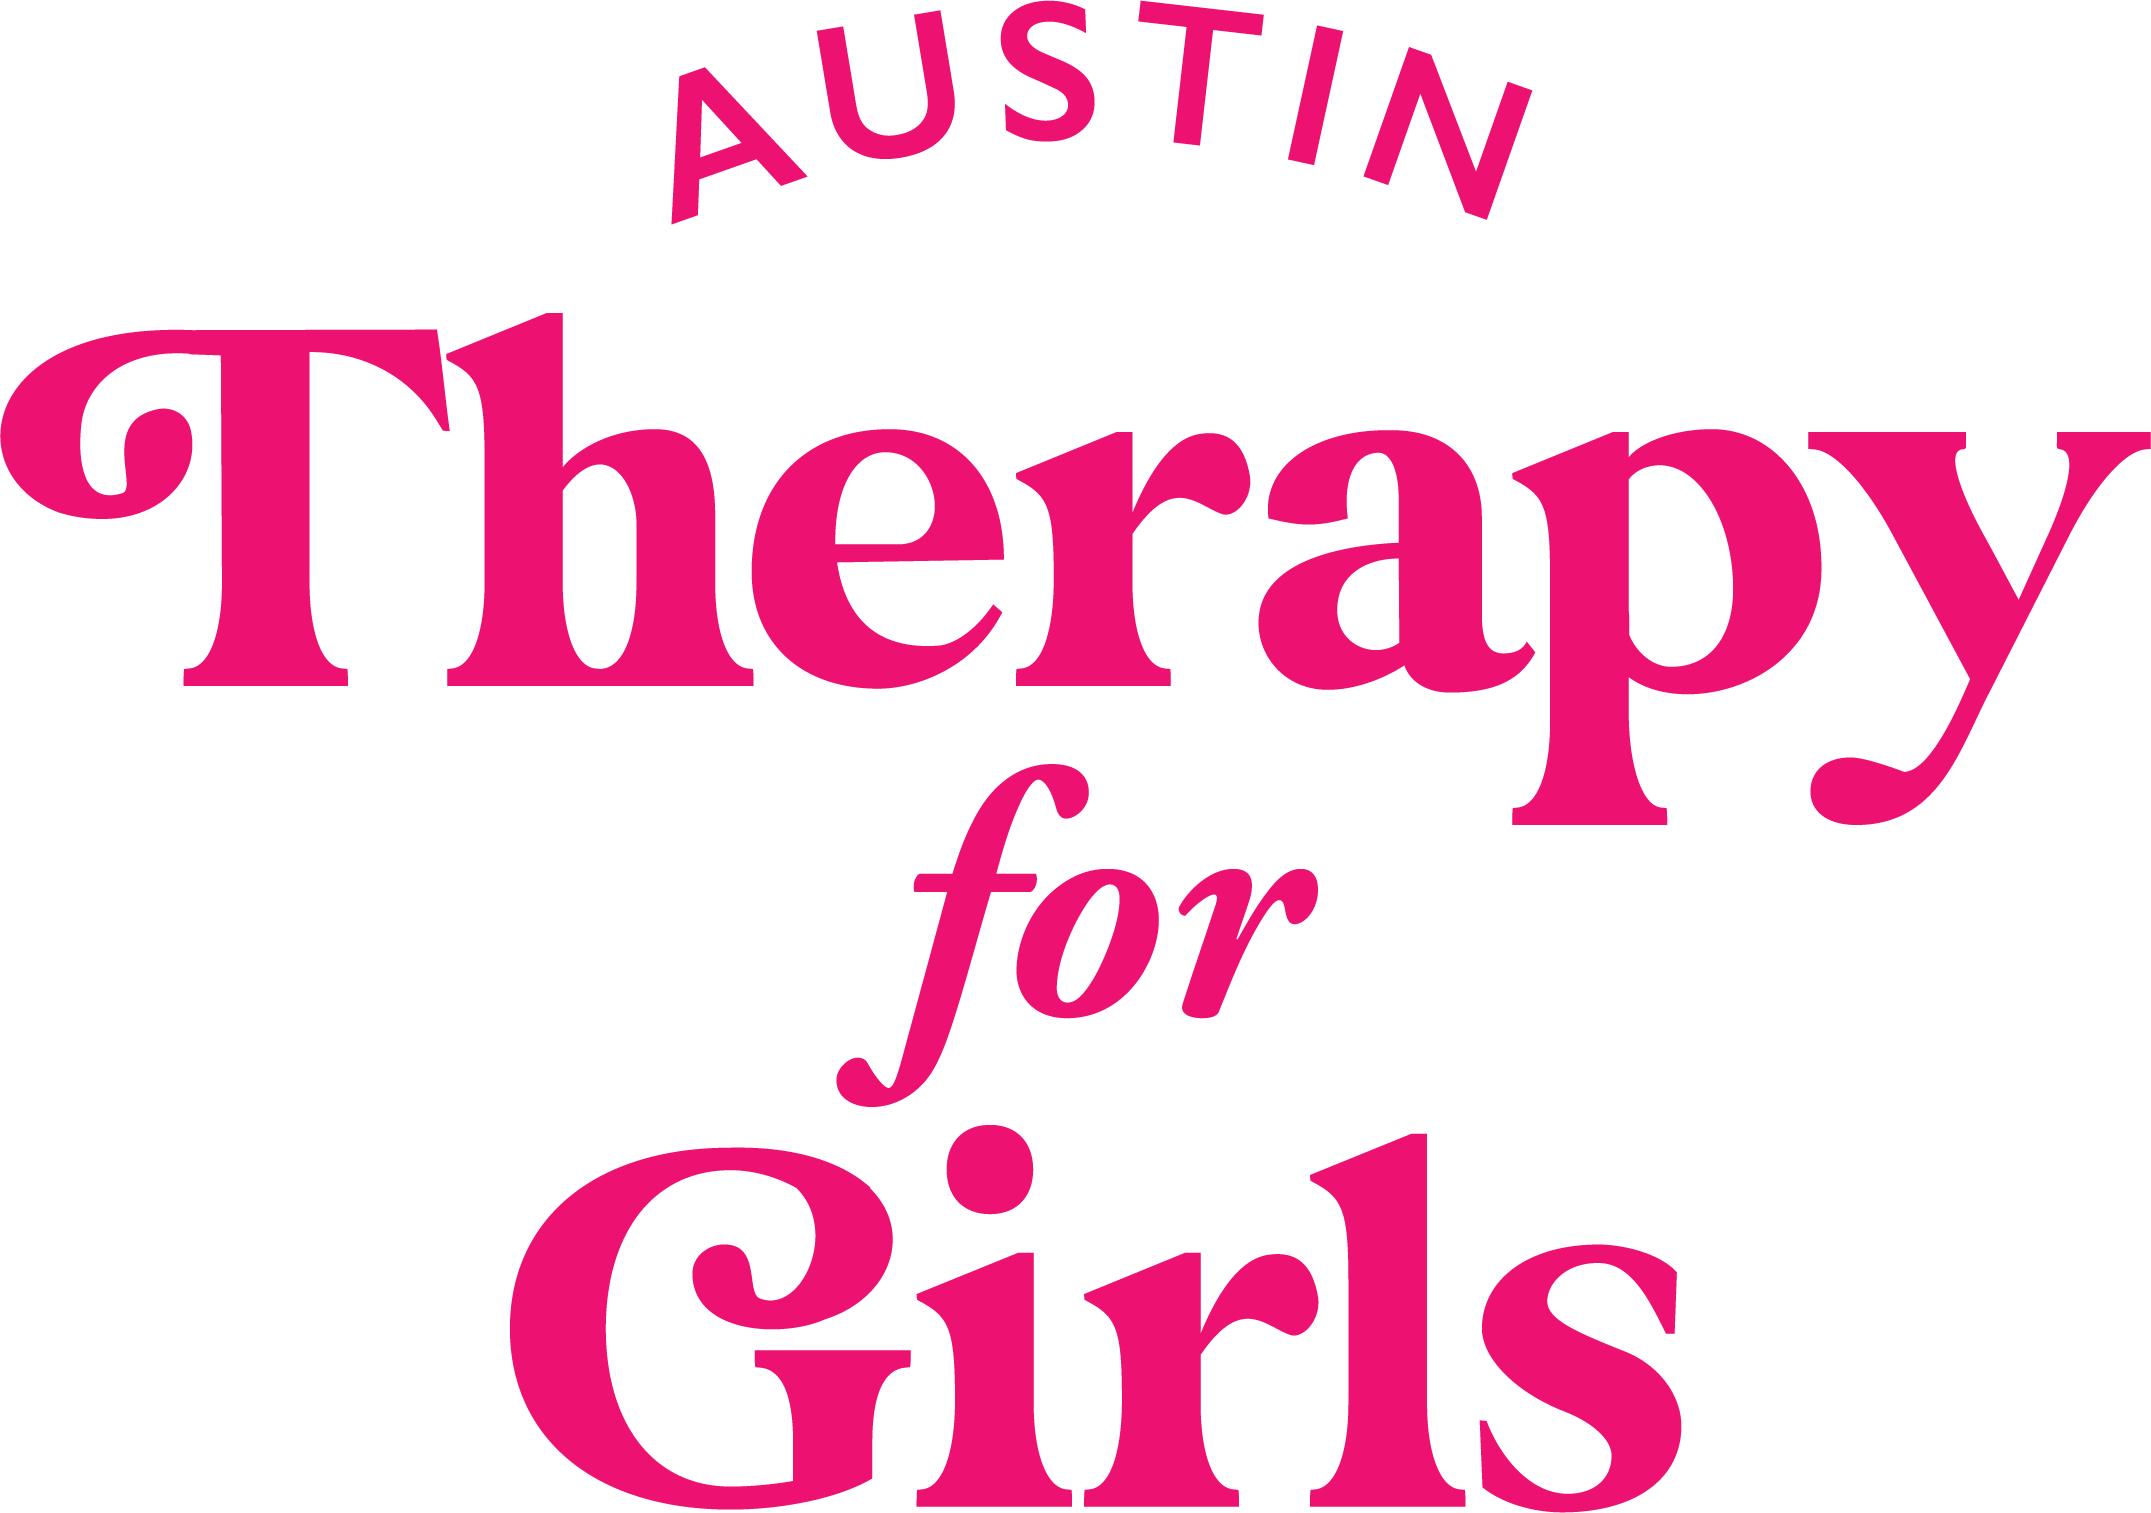 Austin Therapy for Girls logo